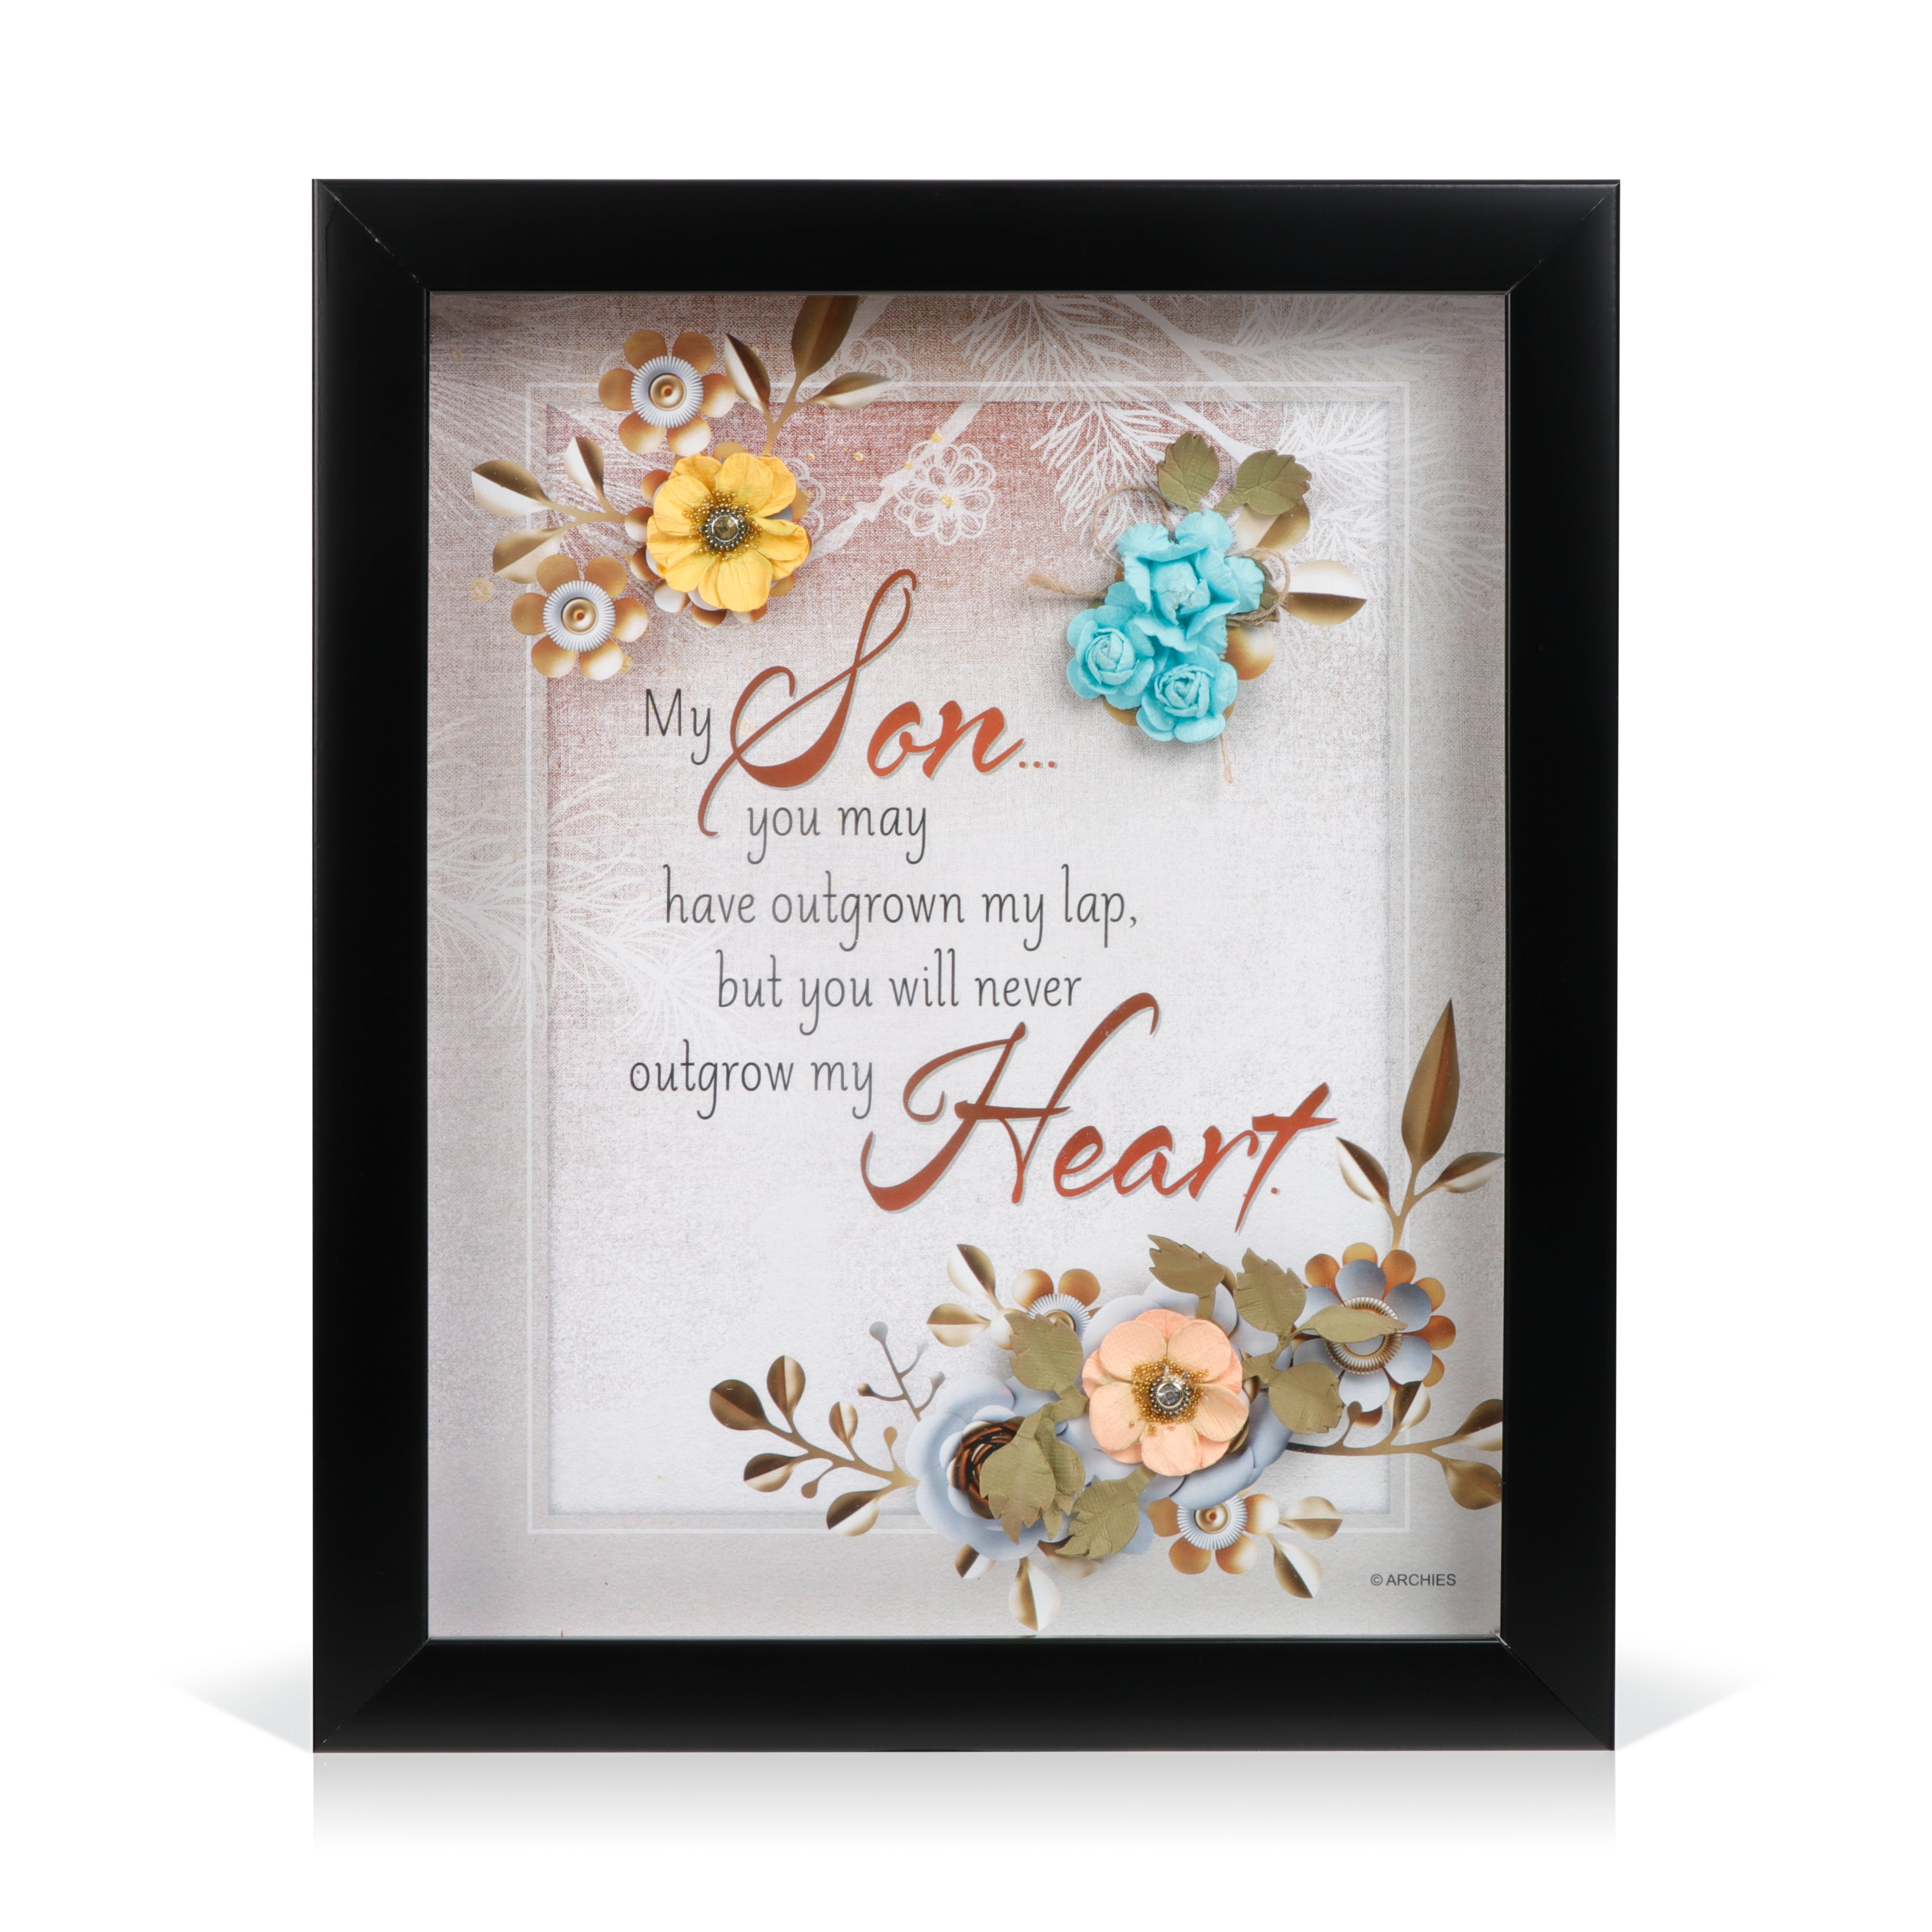 Archies KEEPSAKE QUOTATION - MY SON YOU MAY.... For gifting and Home décor